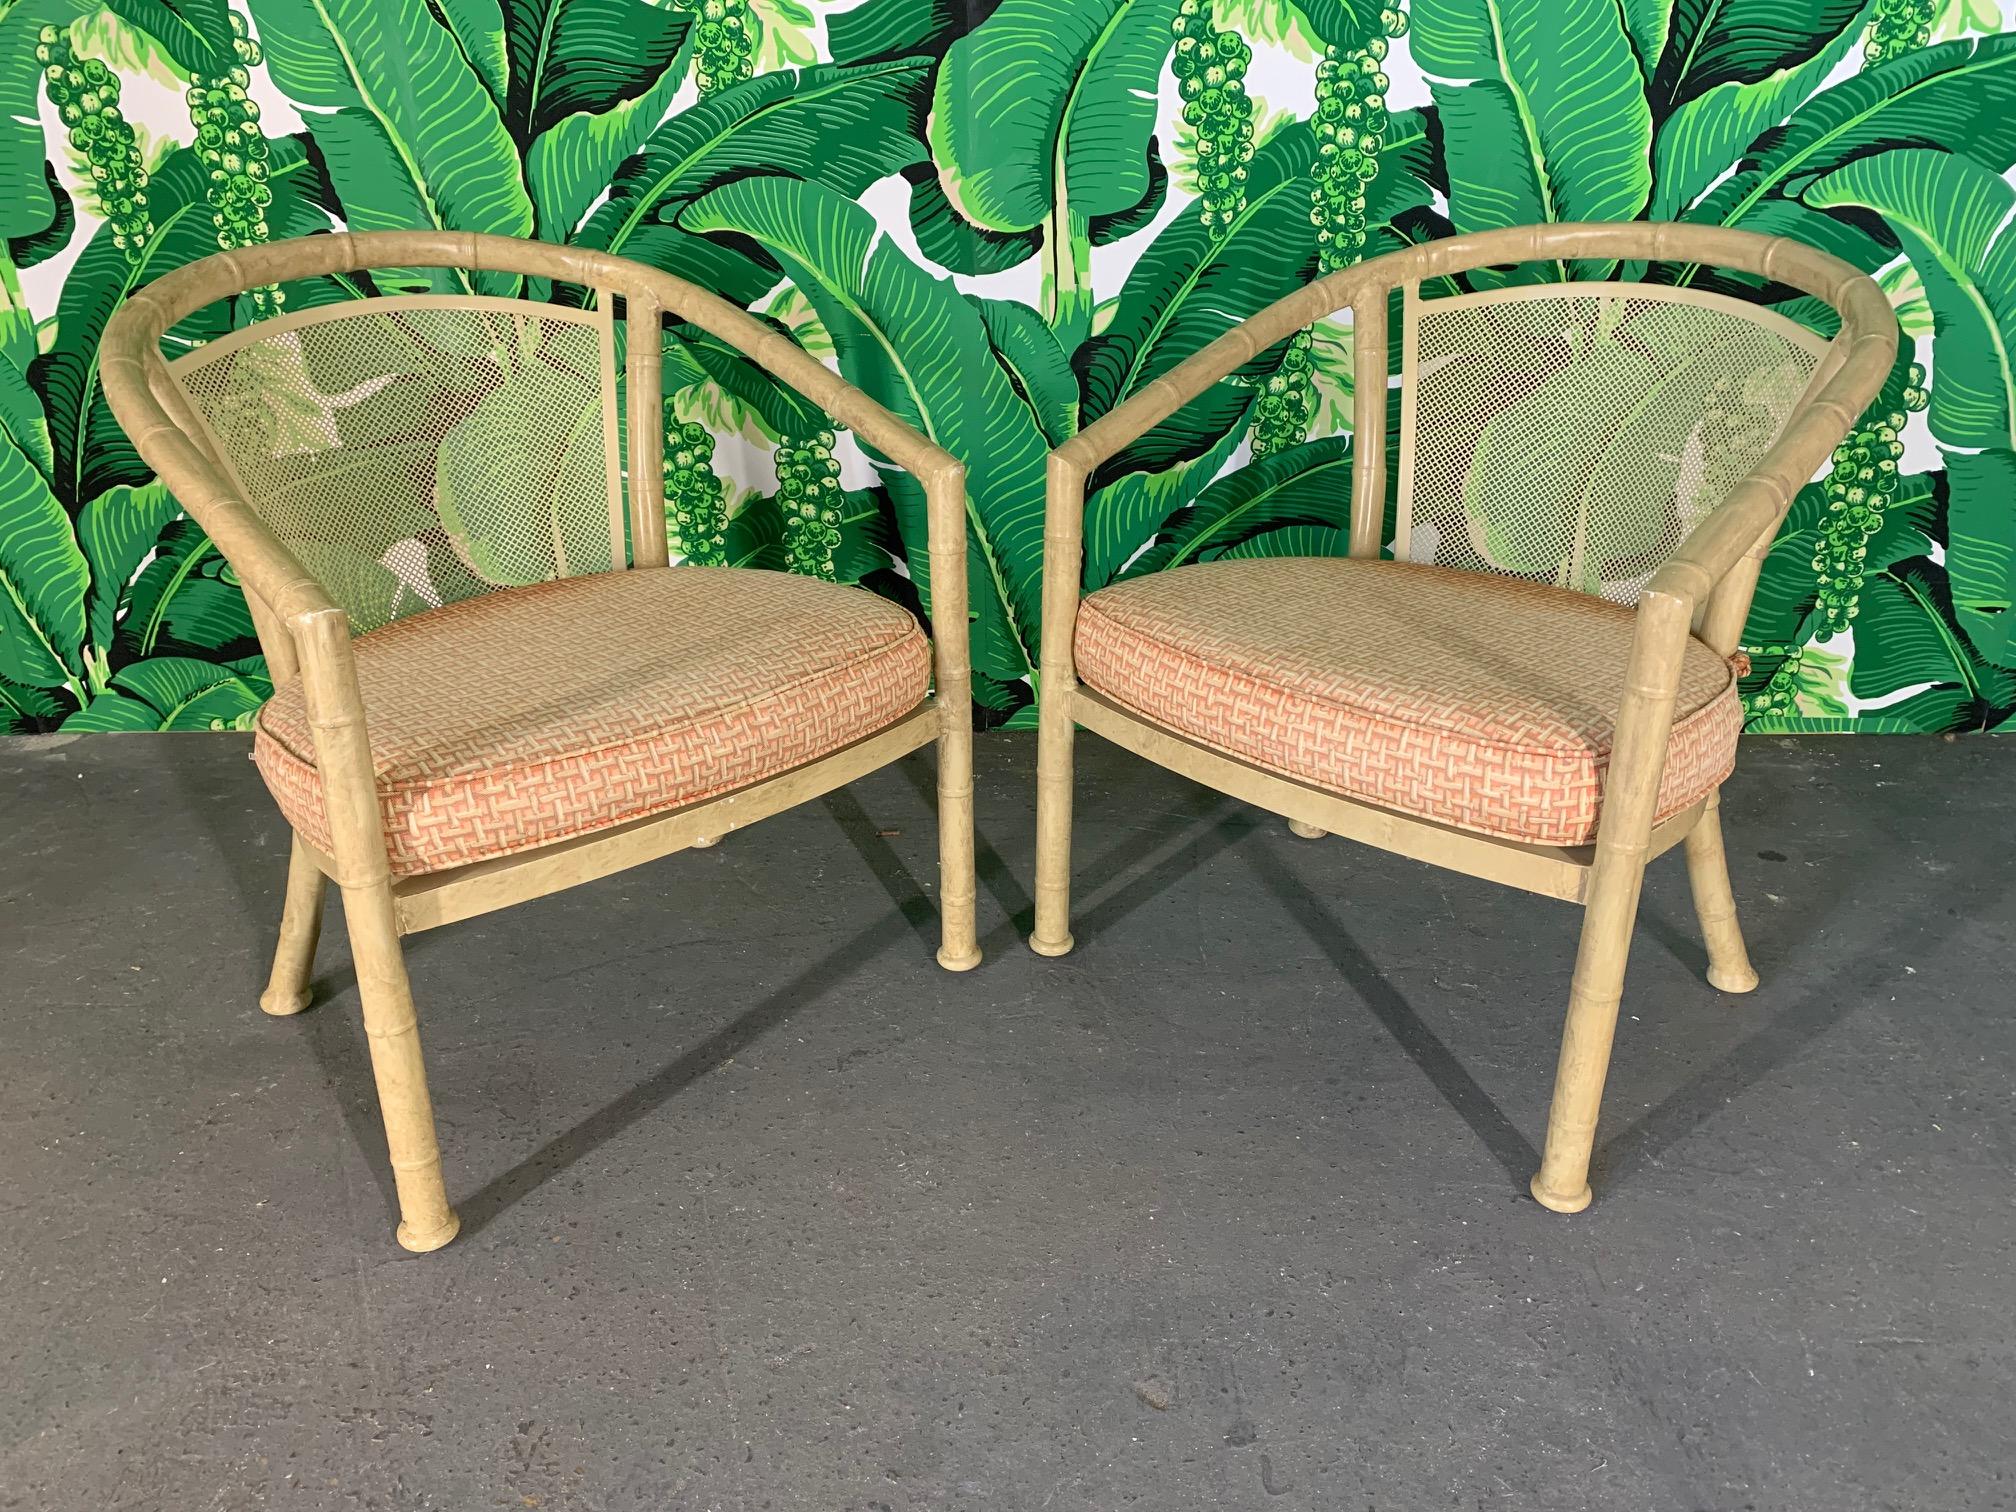 Pair of faux bamboo aluminum patio chairs by Meadowcraft. Good vintage condition with minor imperfections consistent with age, as well as fading to cushions.